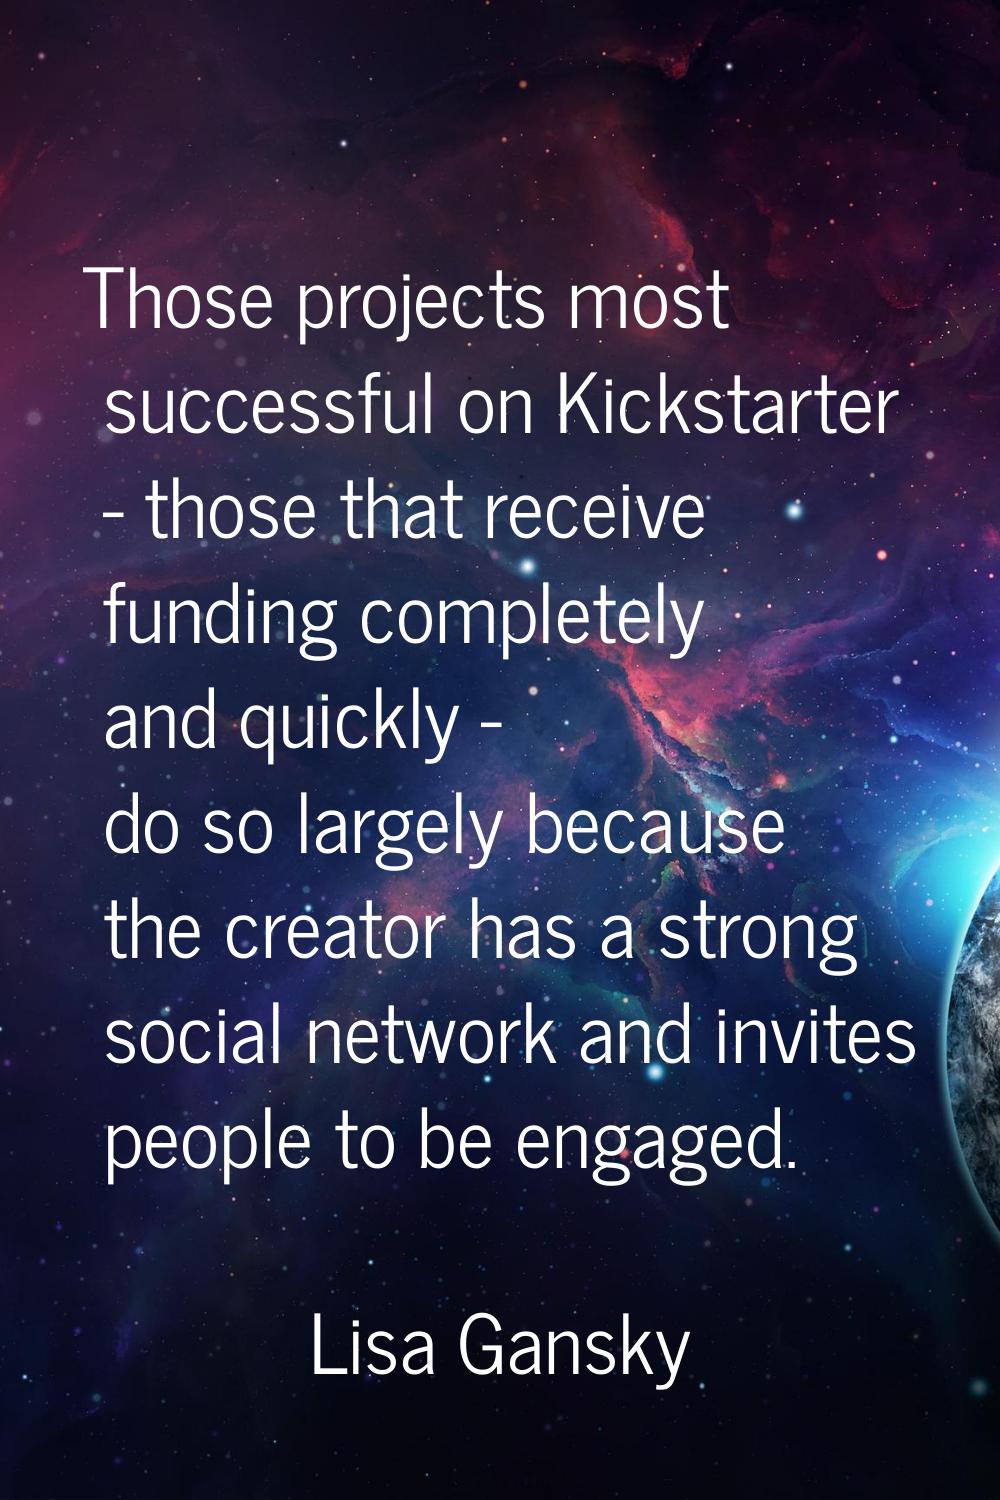 Those projects most successful on Kickstarter - those that receive funding completely and quickly -